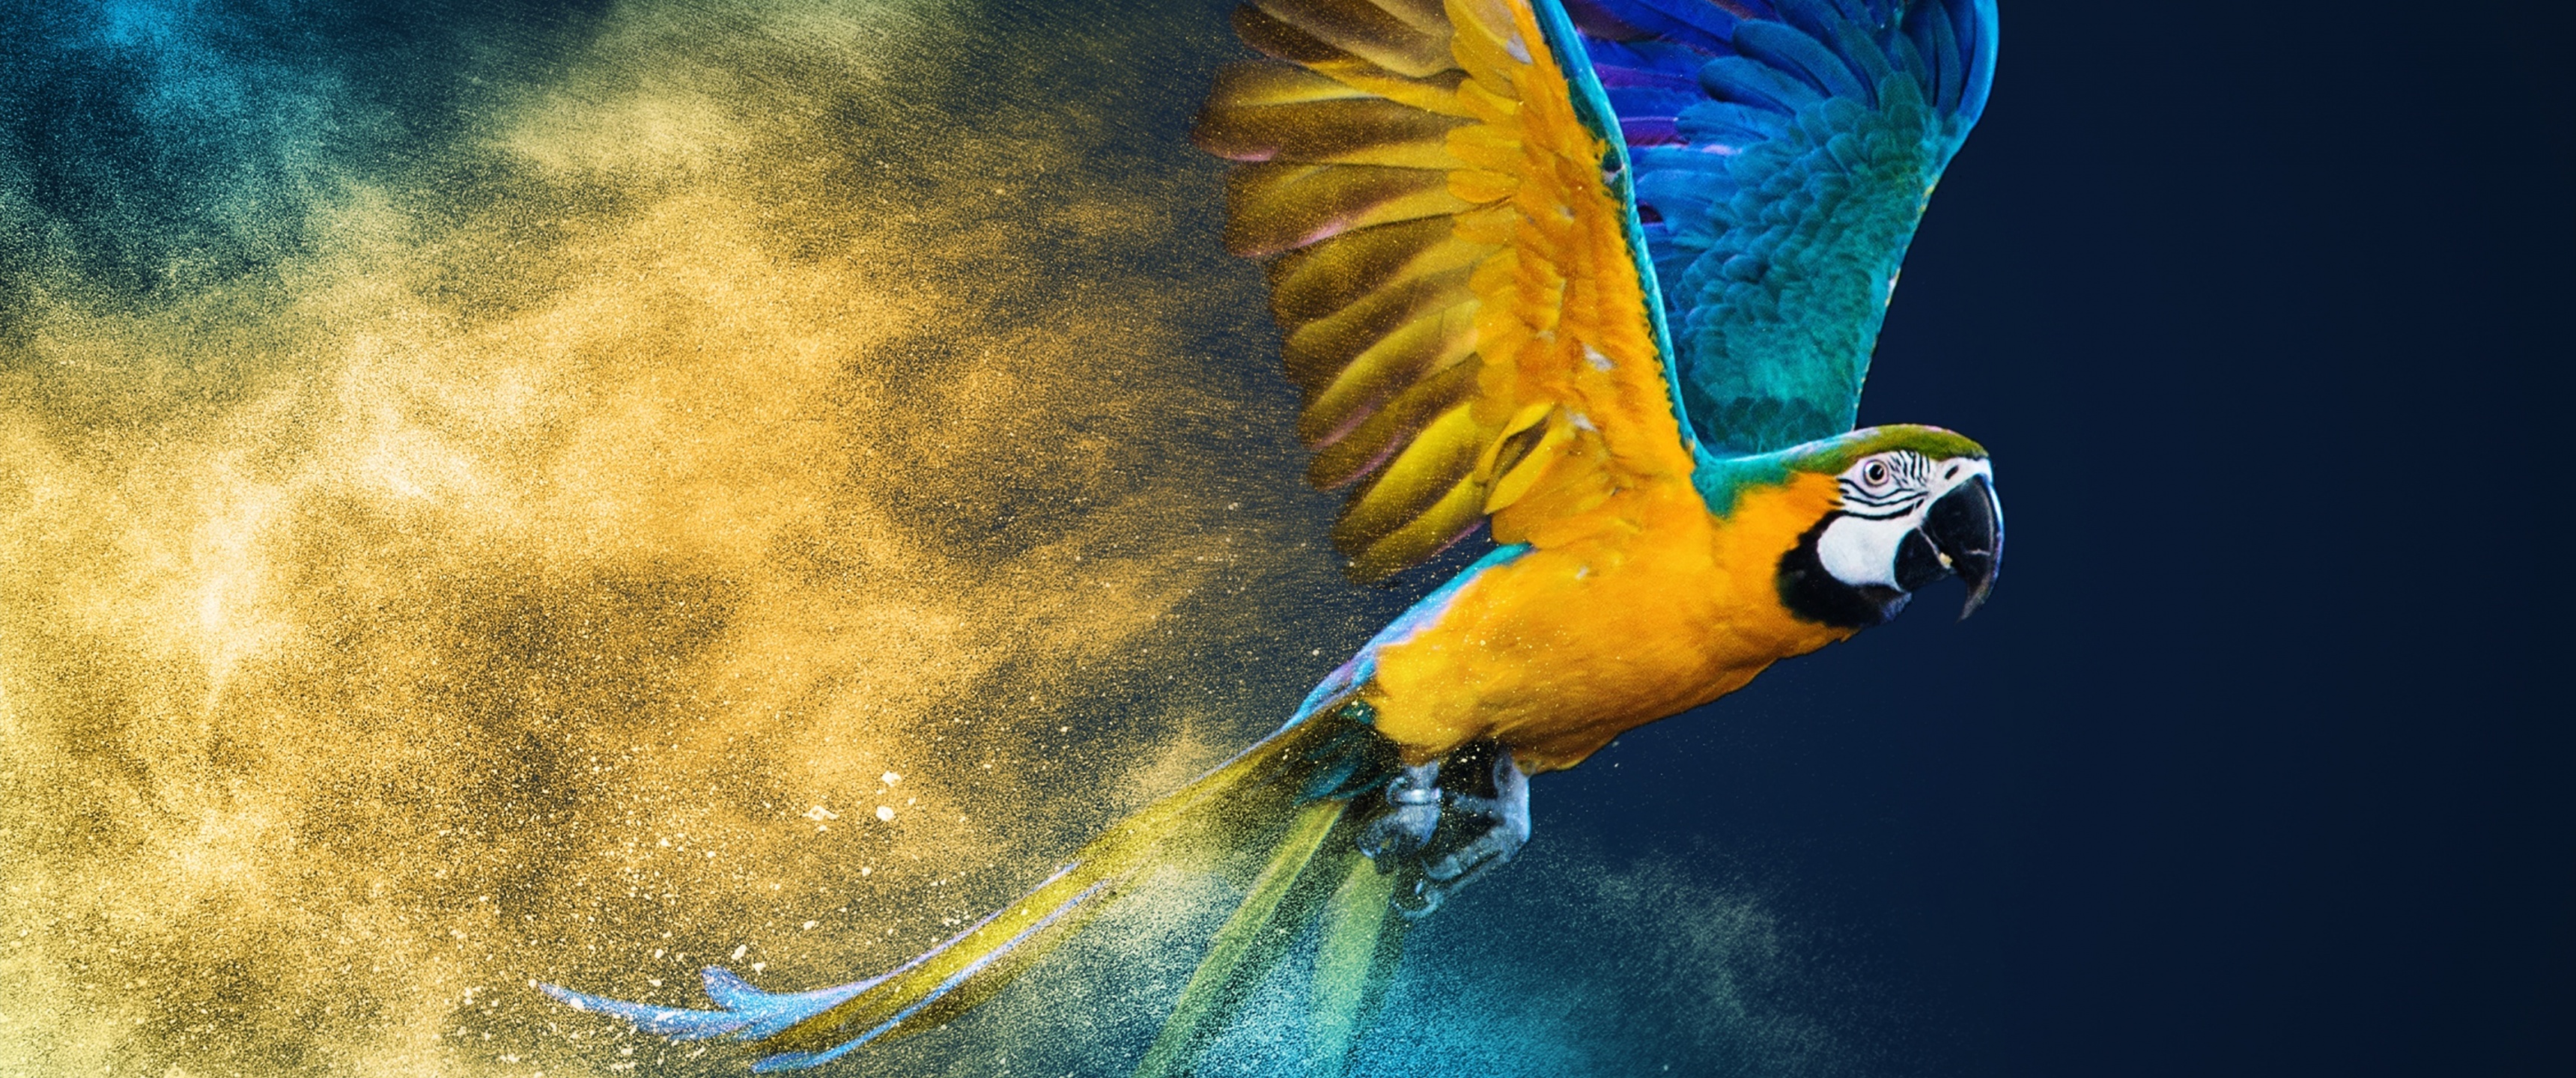 Blue-and-yellow macaw Wallpaper 4K, Colorful background, Animals, #7426